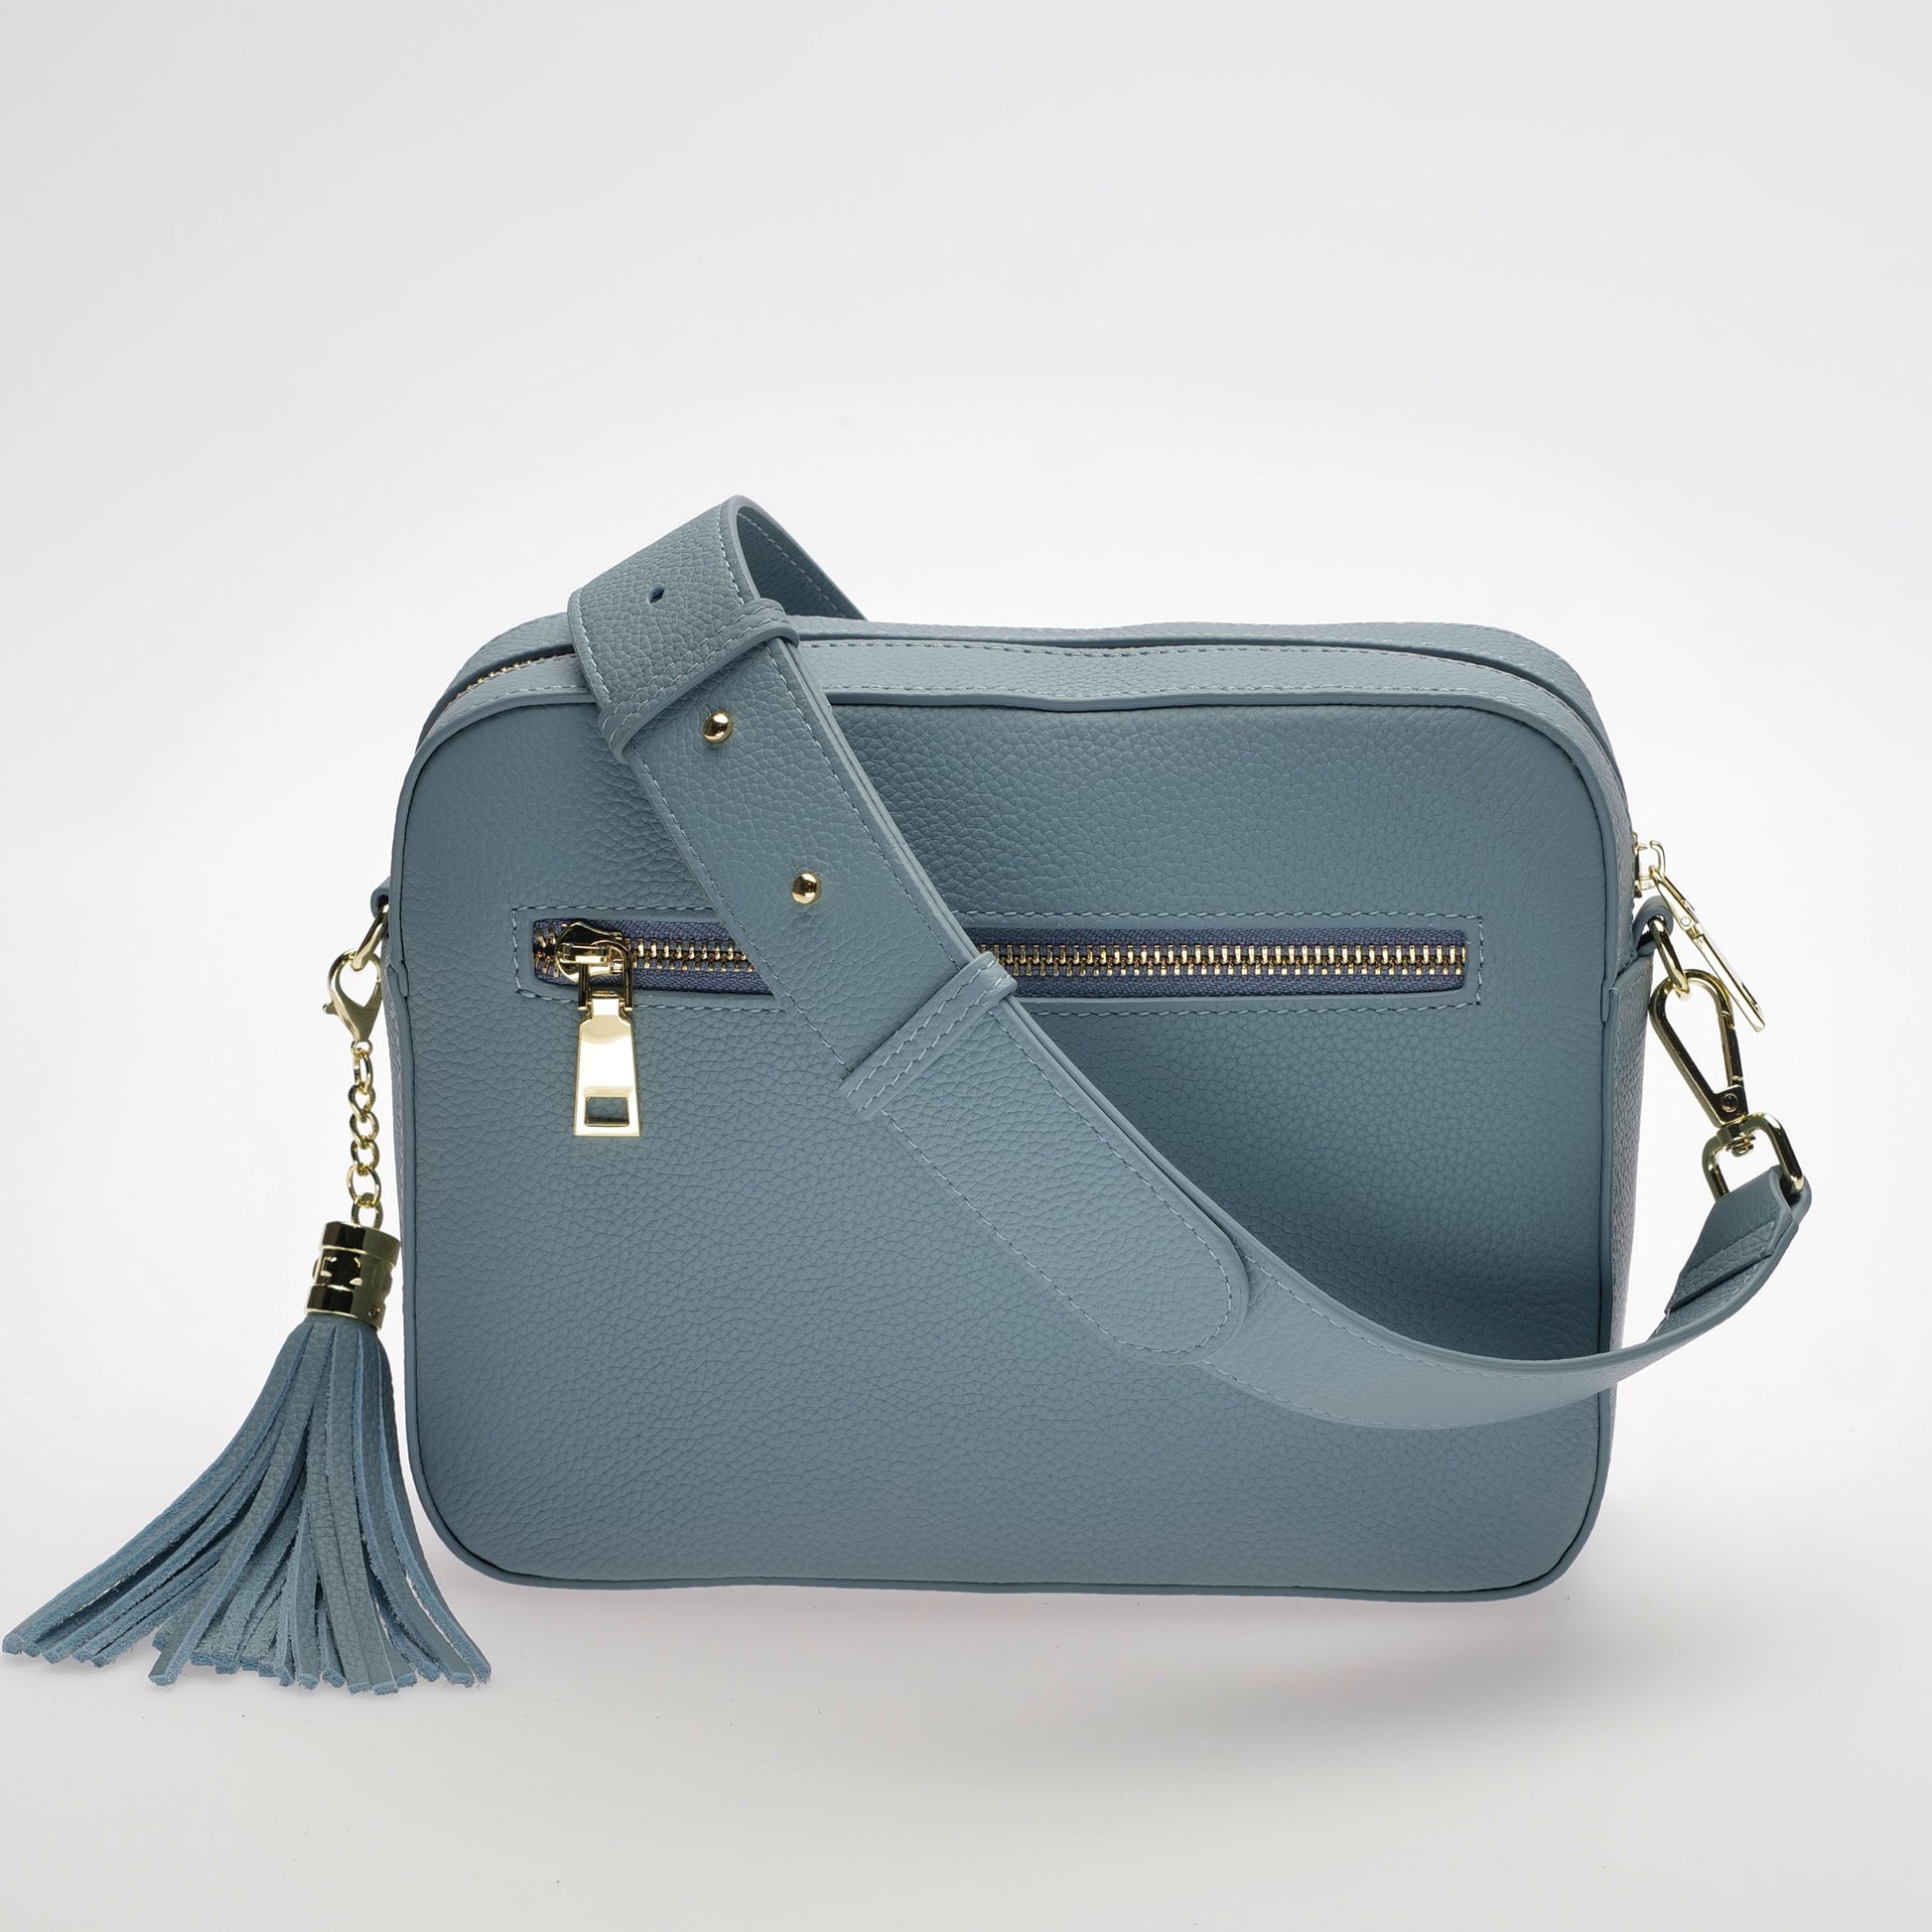 Stratford Crossbody Bag - West Coast Blue with Matching Leather Strap